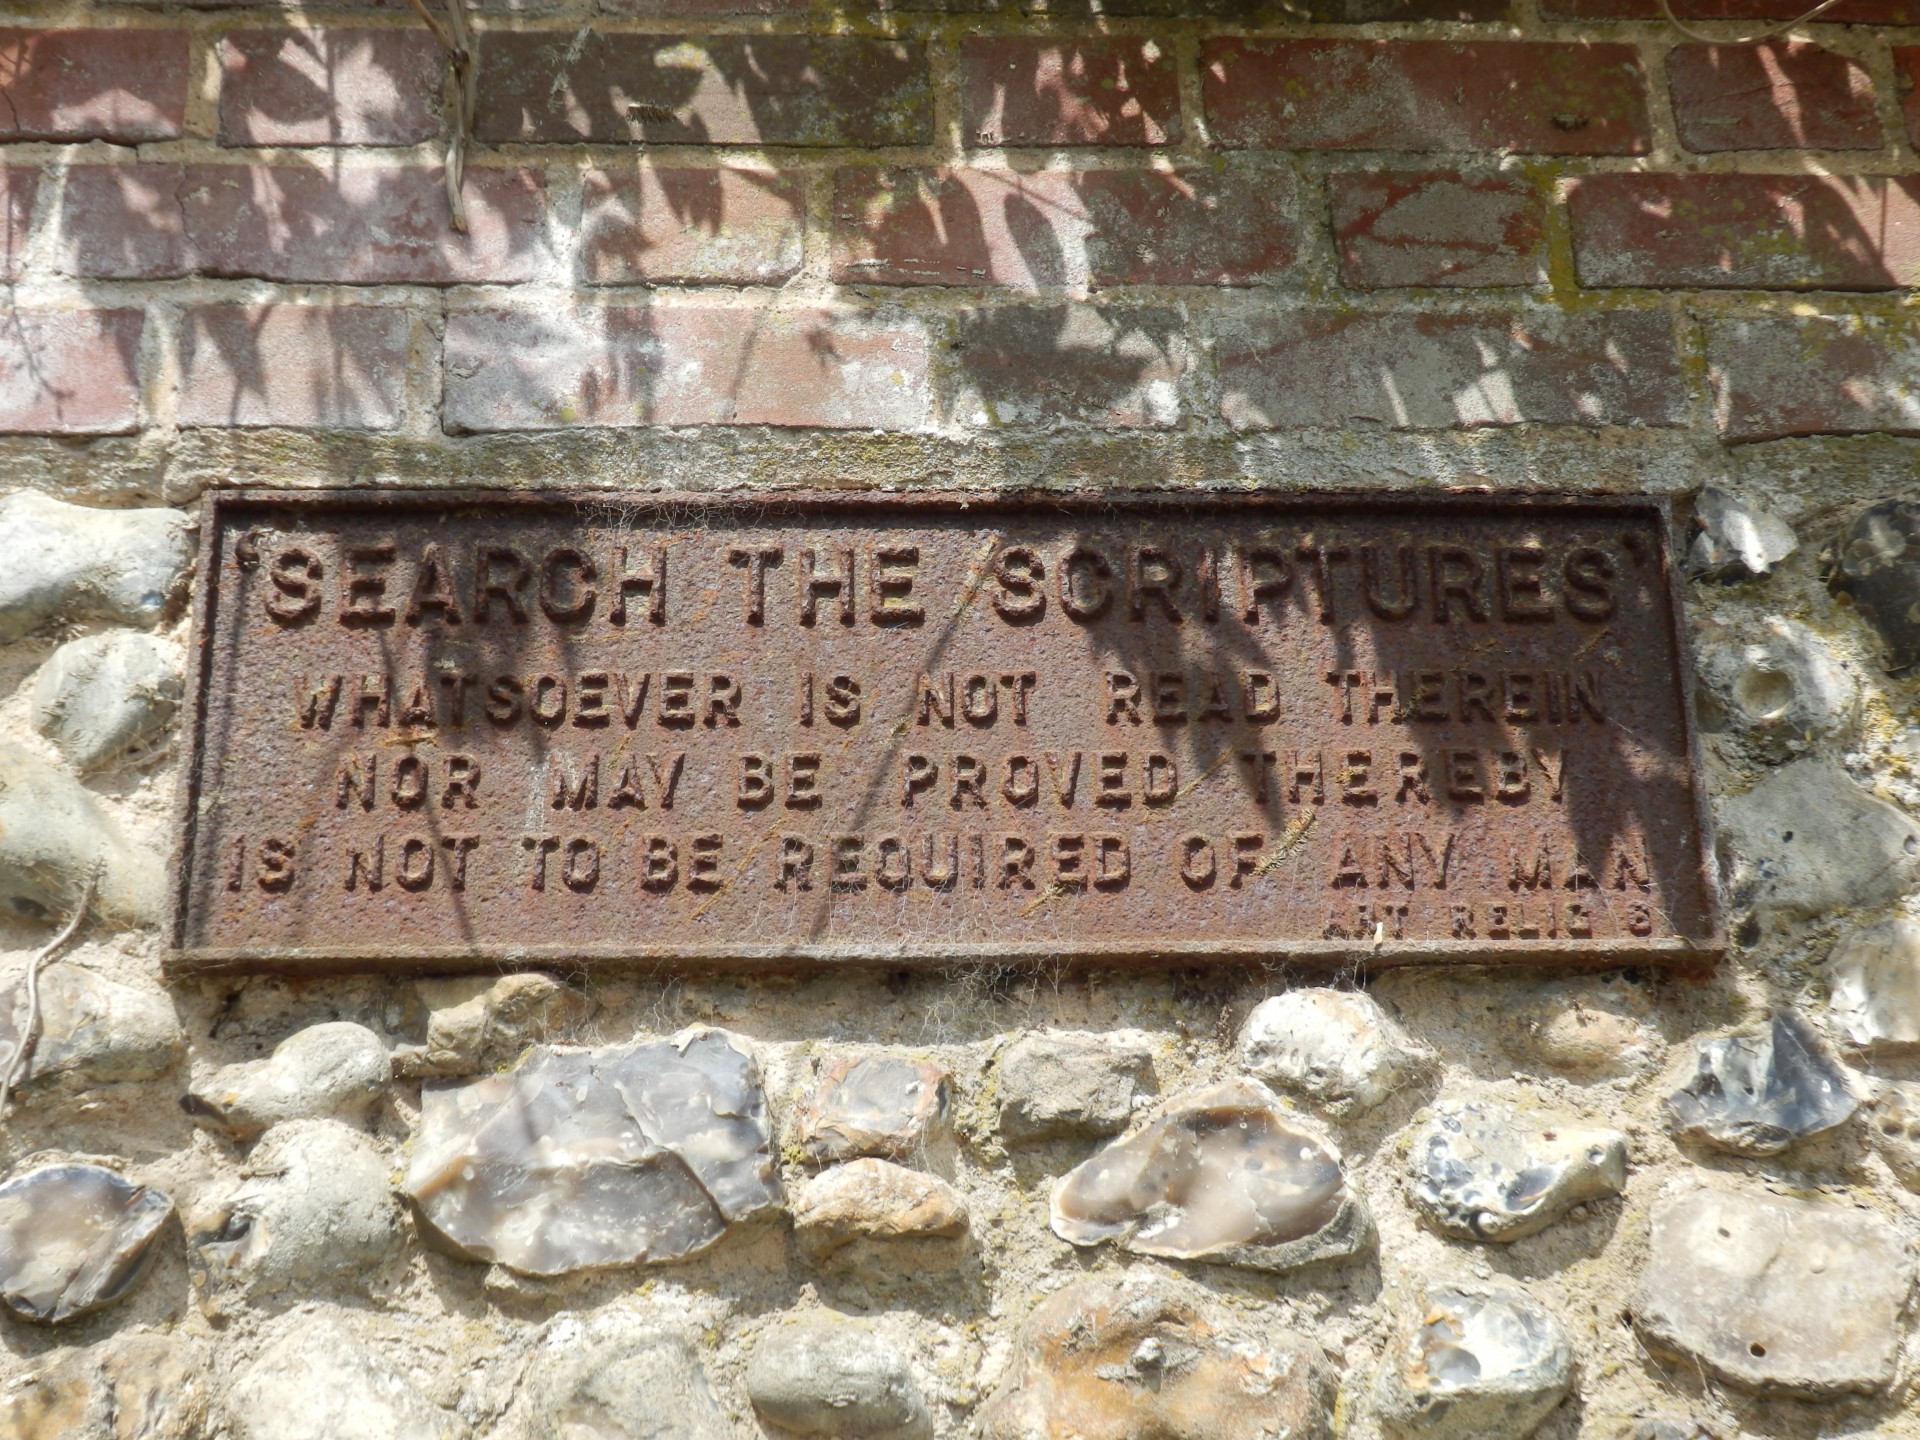 An old sign in a stone wall about reading the Scriptures (Bible).